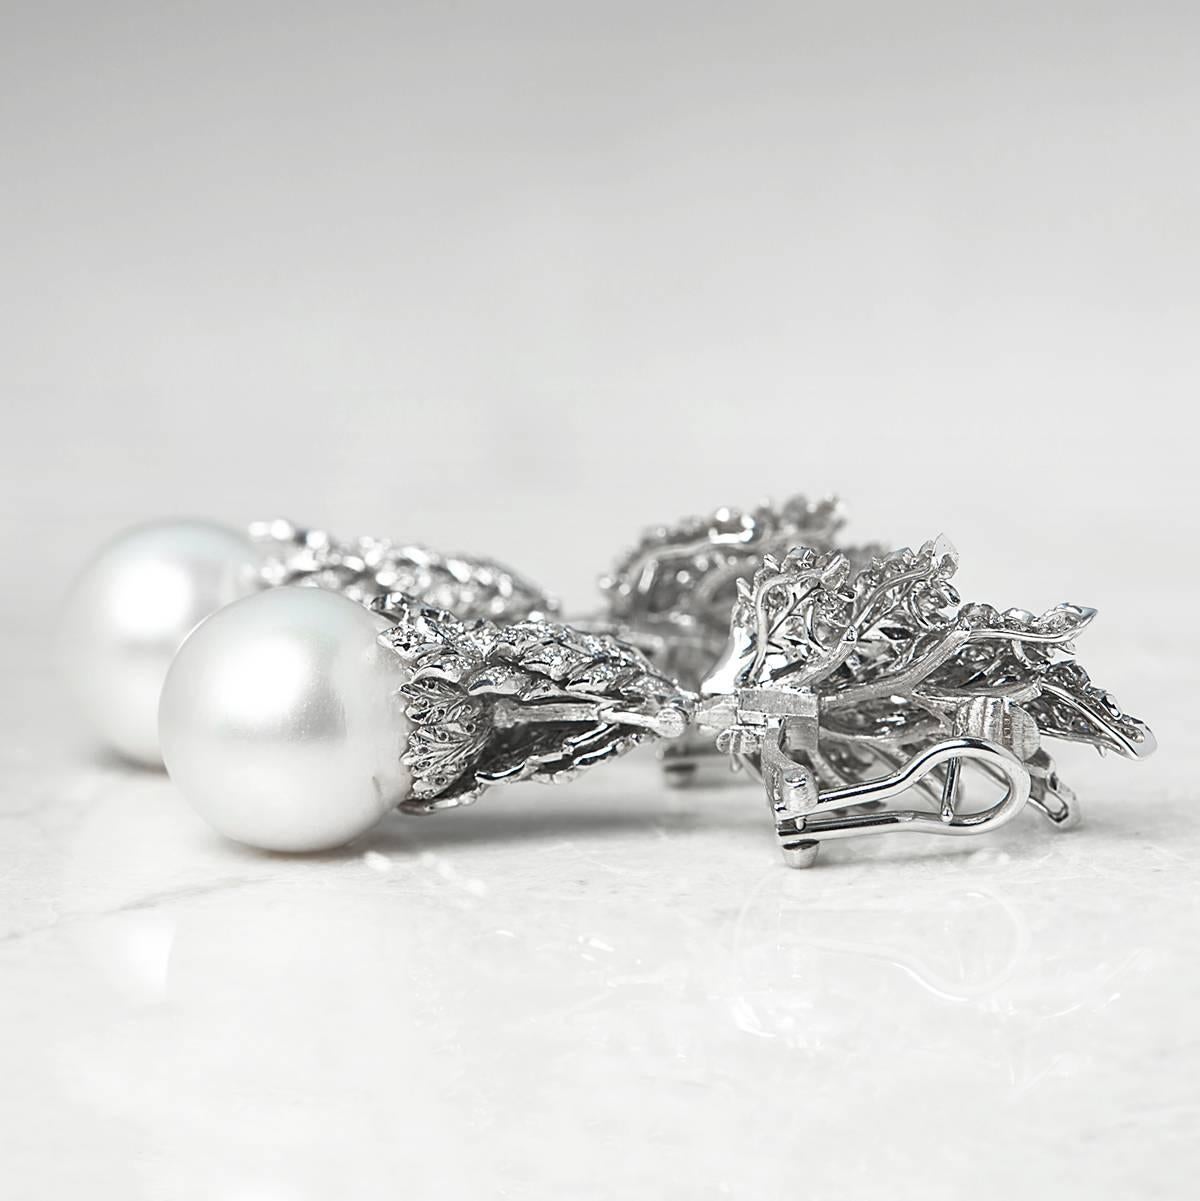 pearl and diamond statement earrings